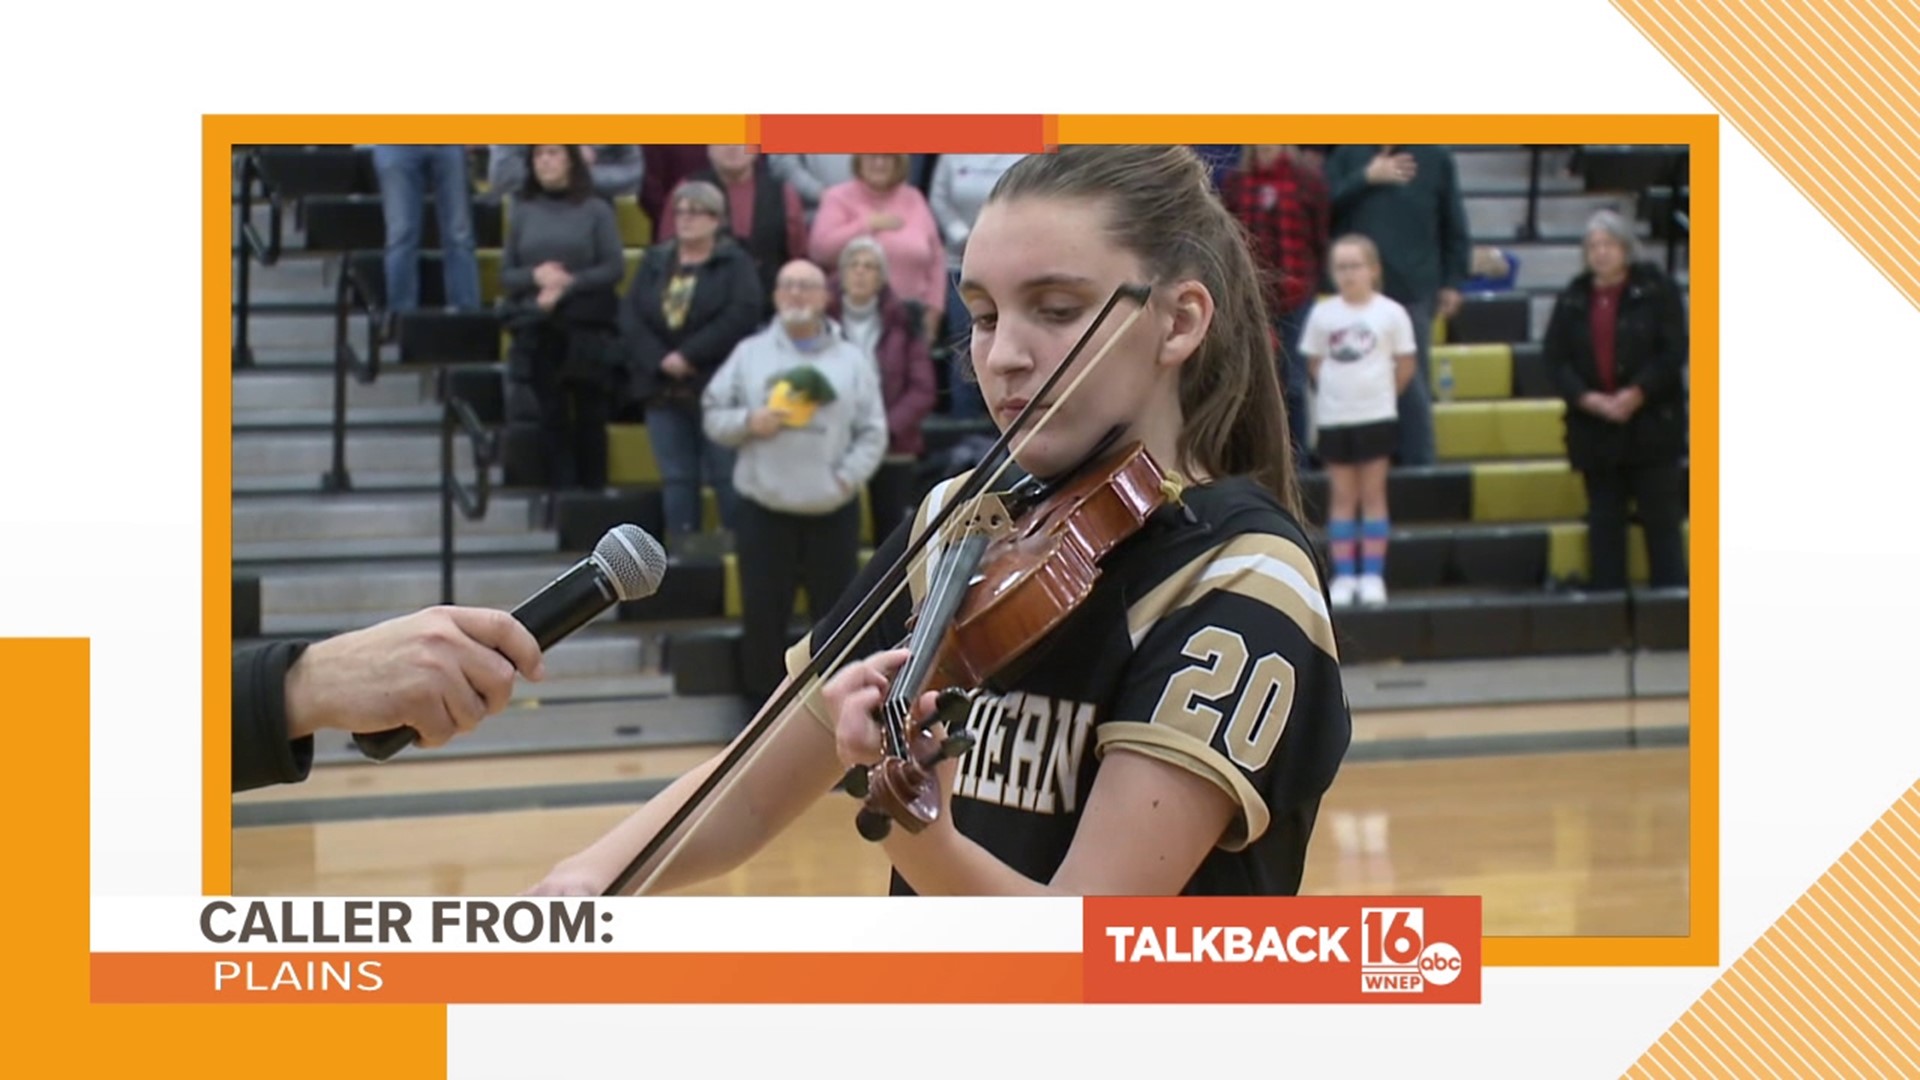 Callers are praising Michaela Williams' and her violin version of the National Anthem.